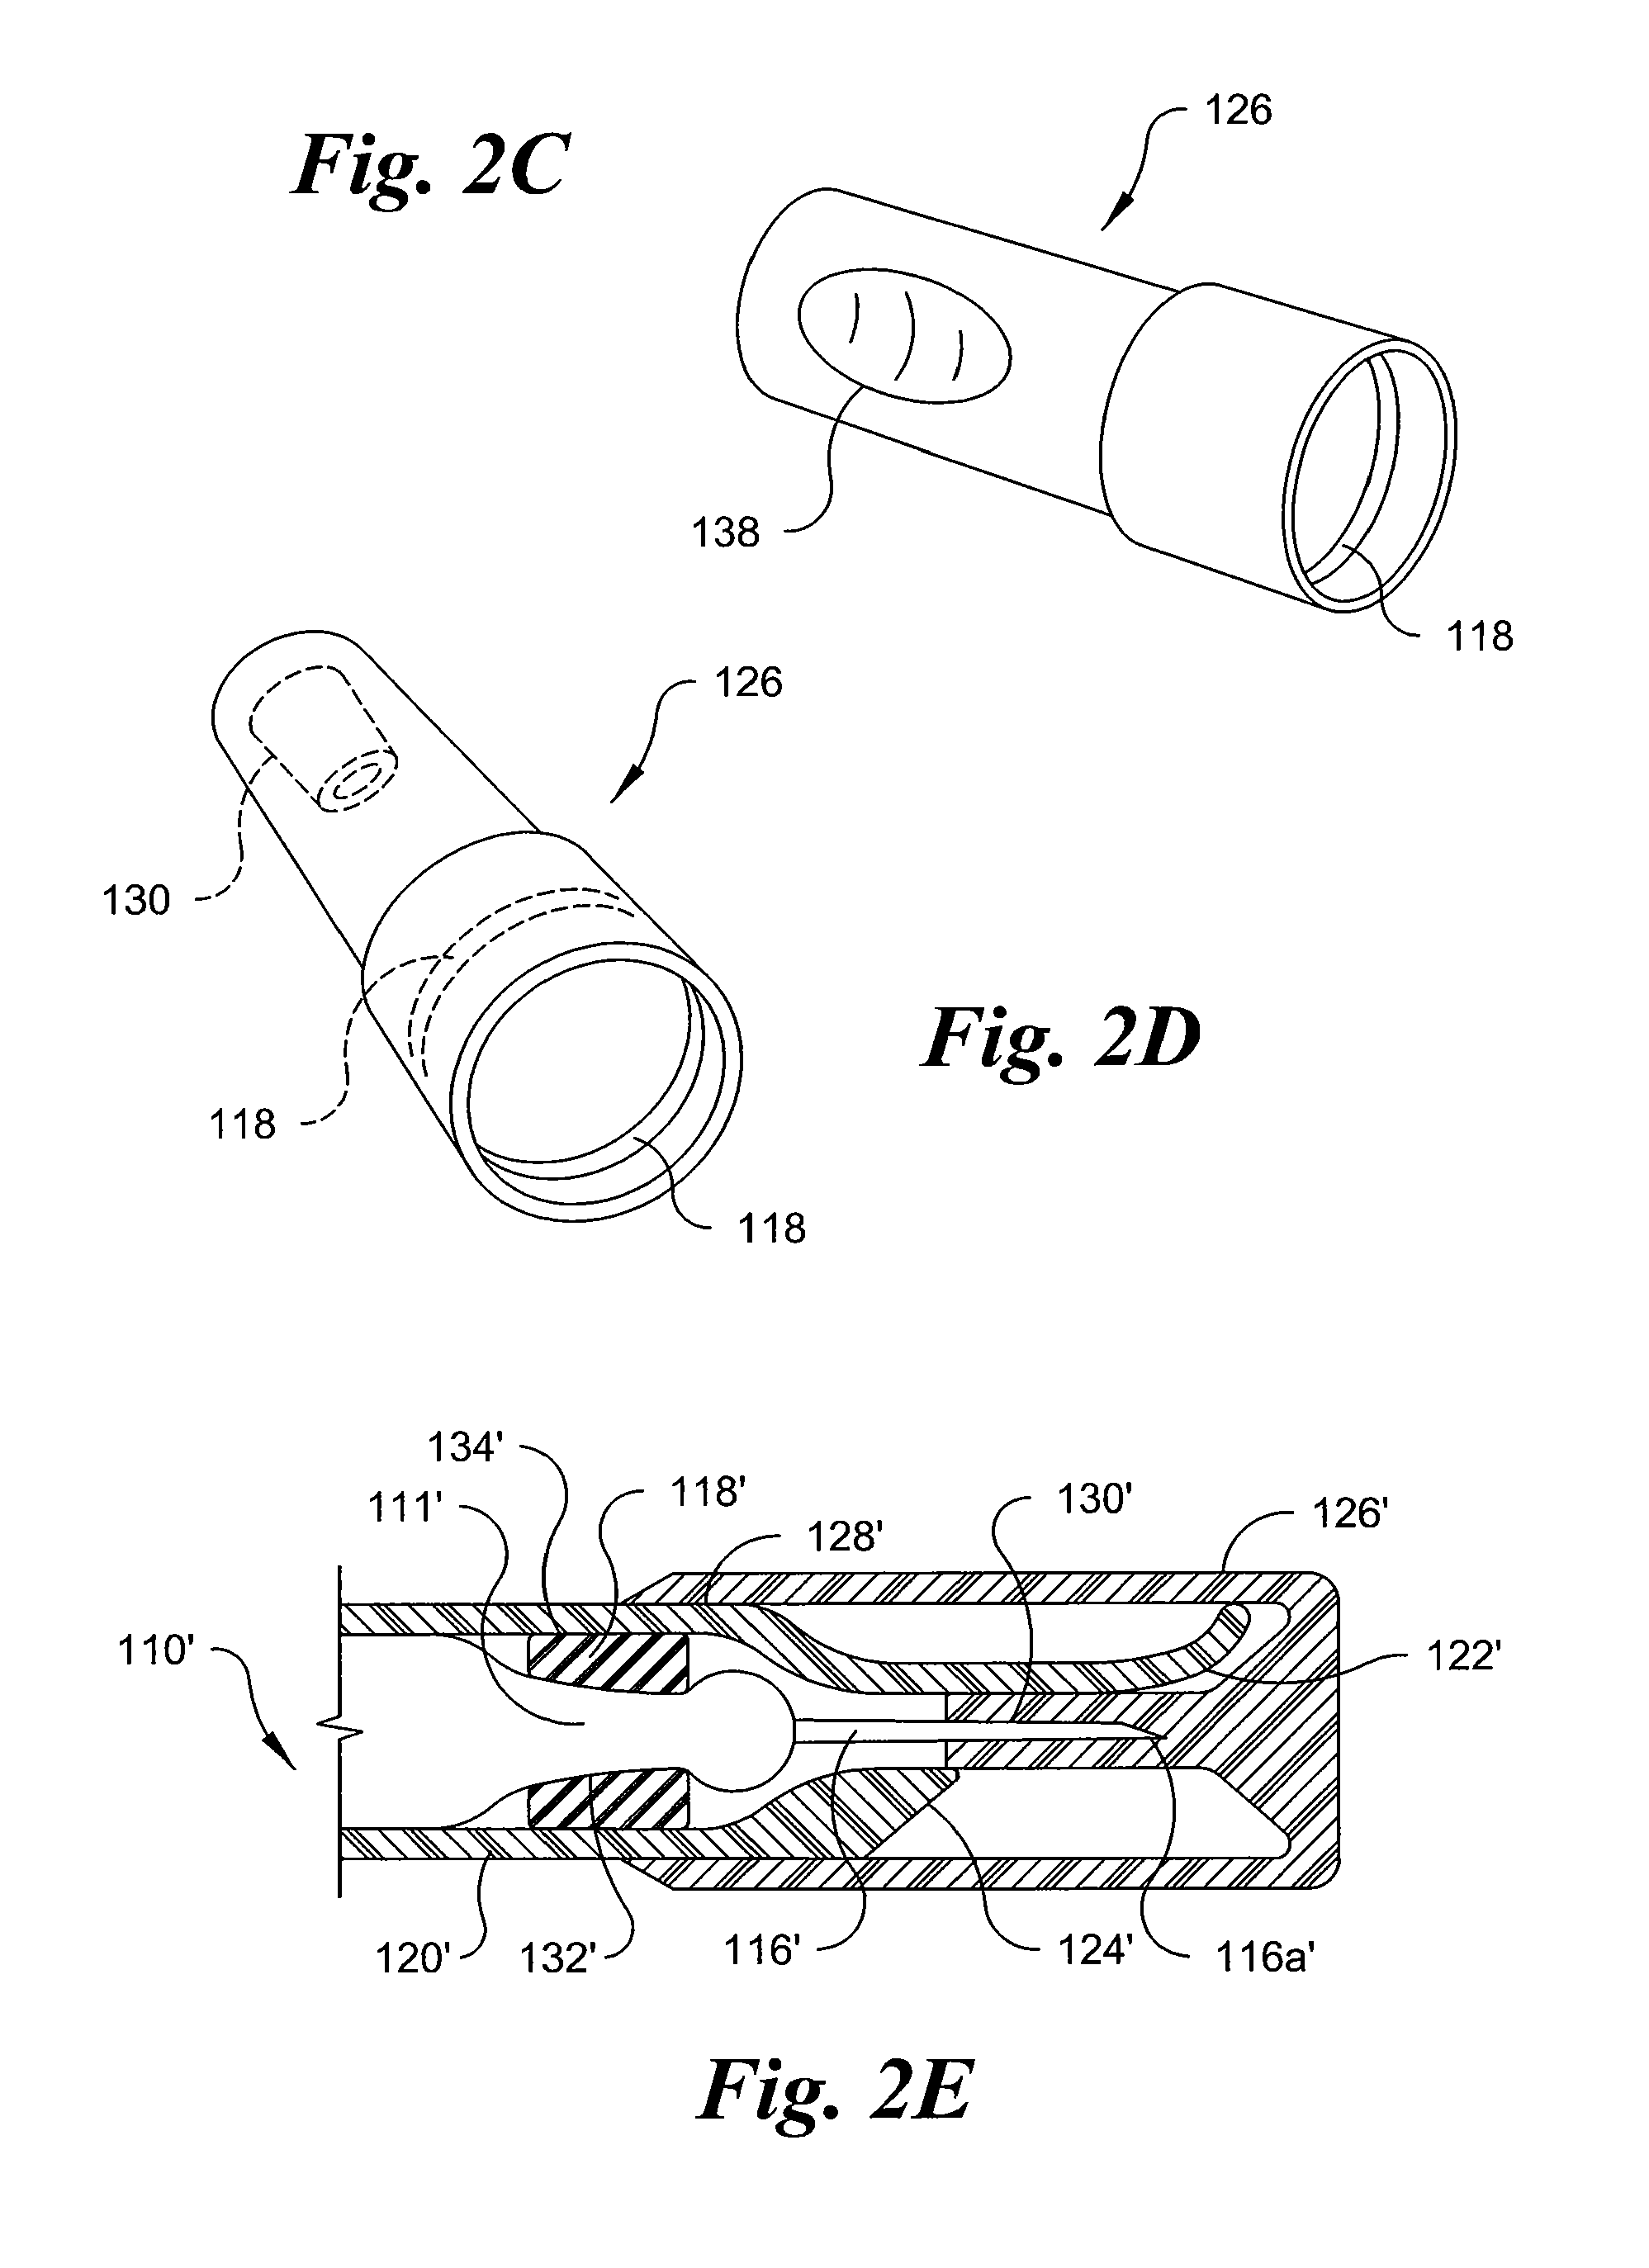 Assembly for use with a syringe